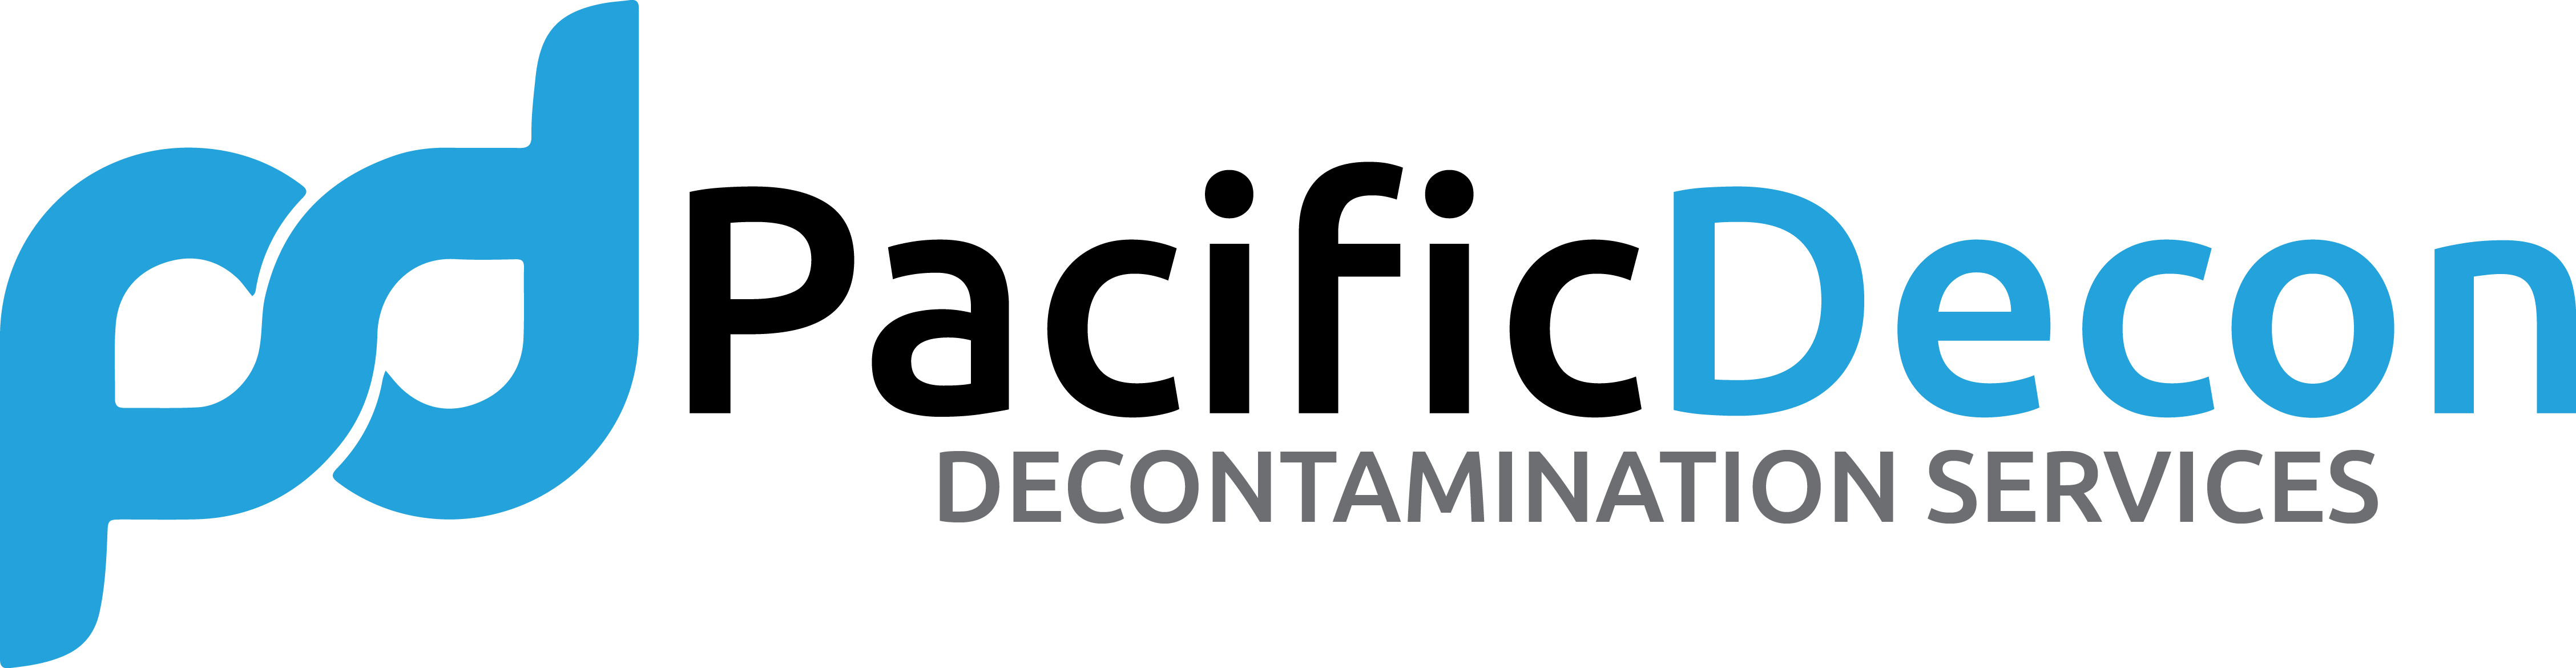 Decontamination and disinfection service logo